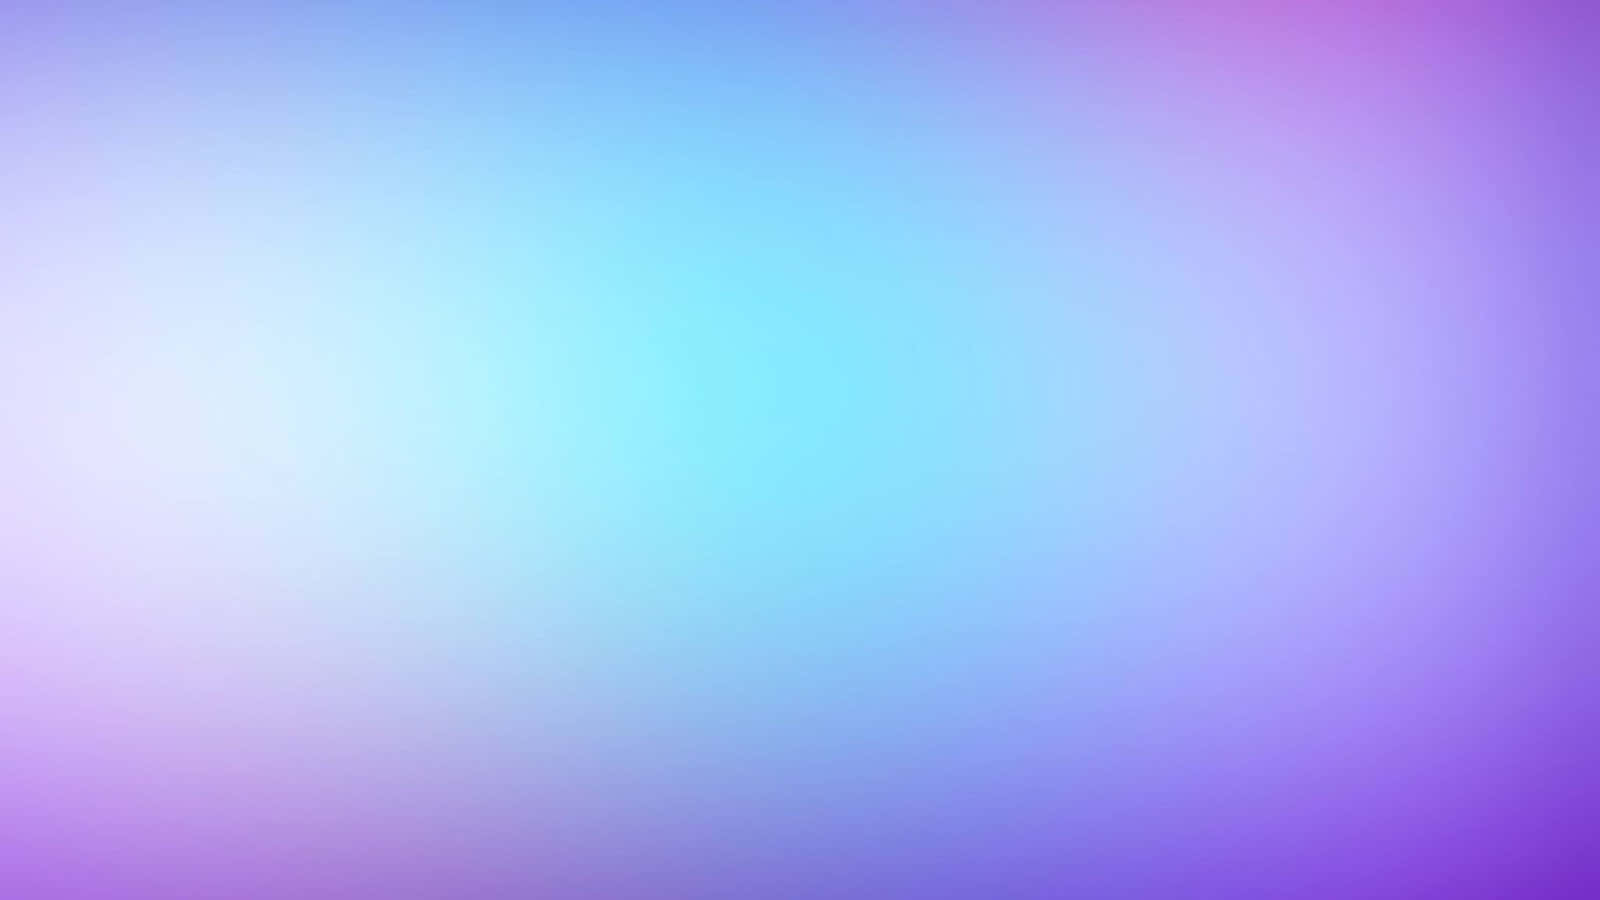 A Blurred Blue And Purple Background